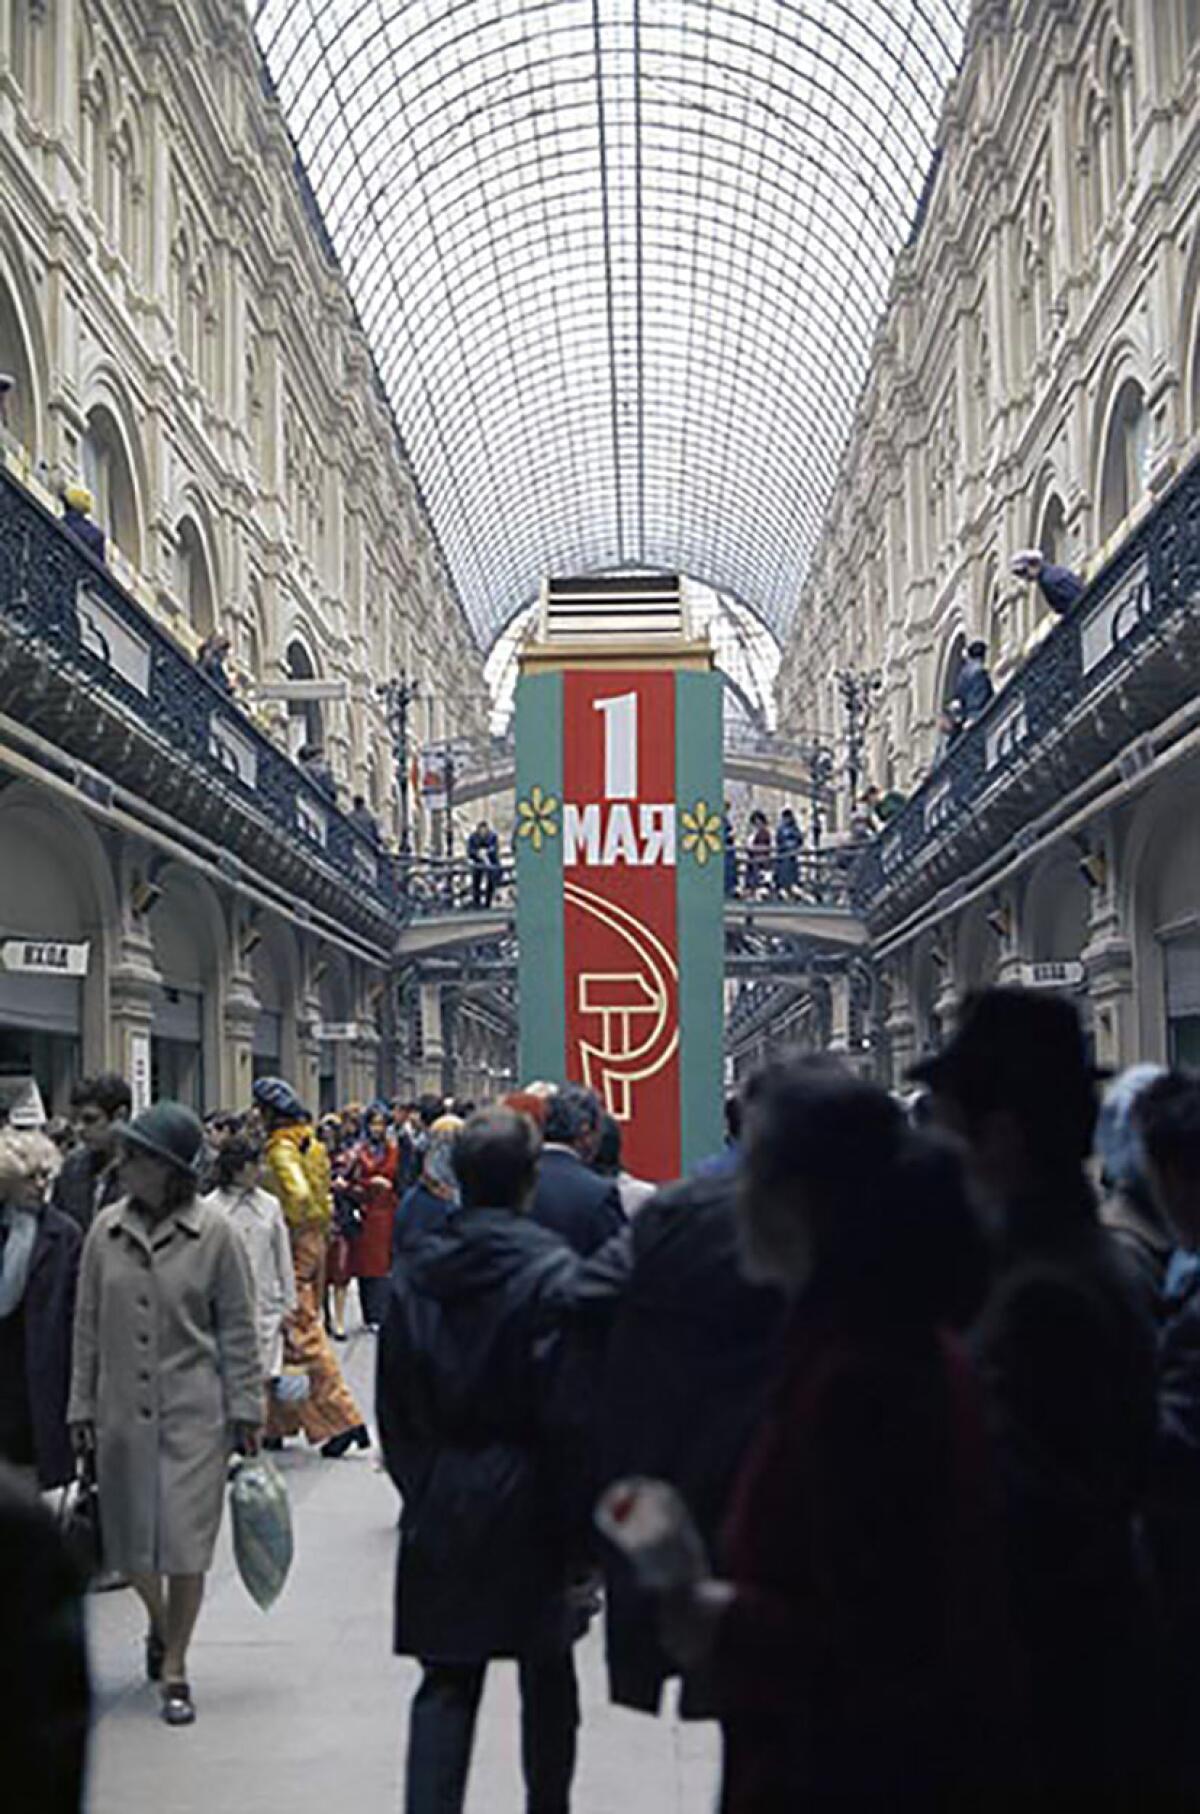 People in a store. In the background is a large red banner with a hammer and sickle and May 1 in Russian letters.  